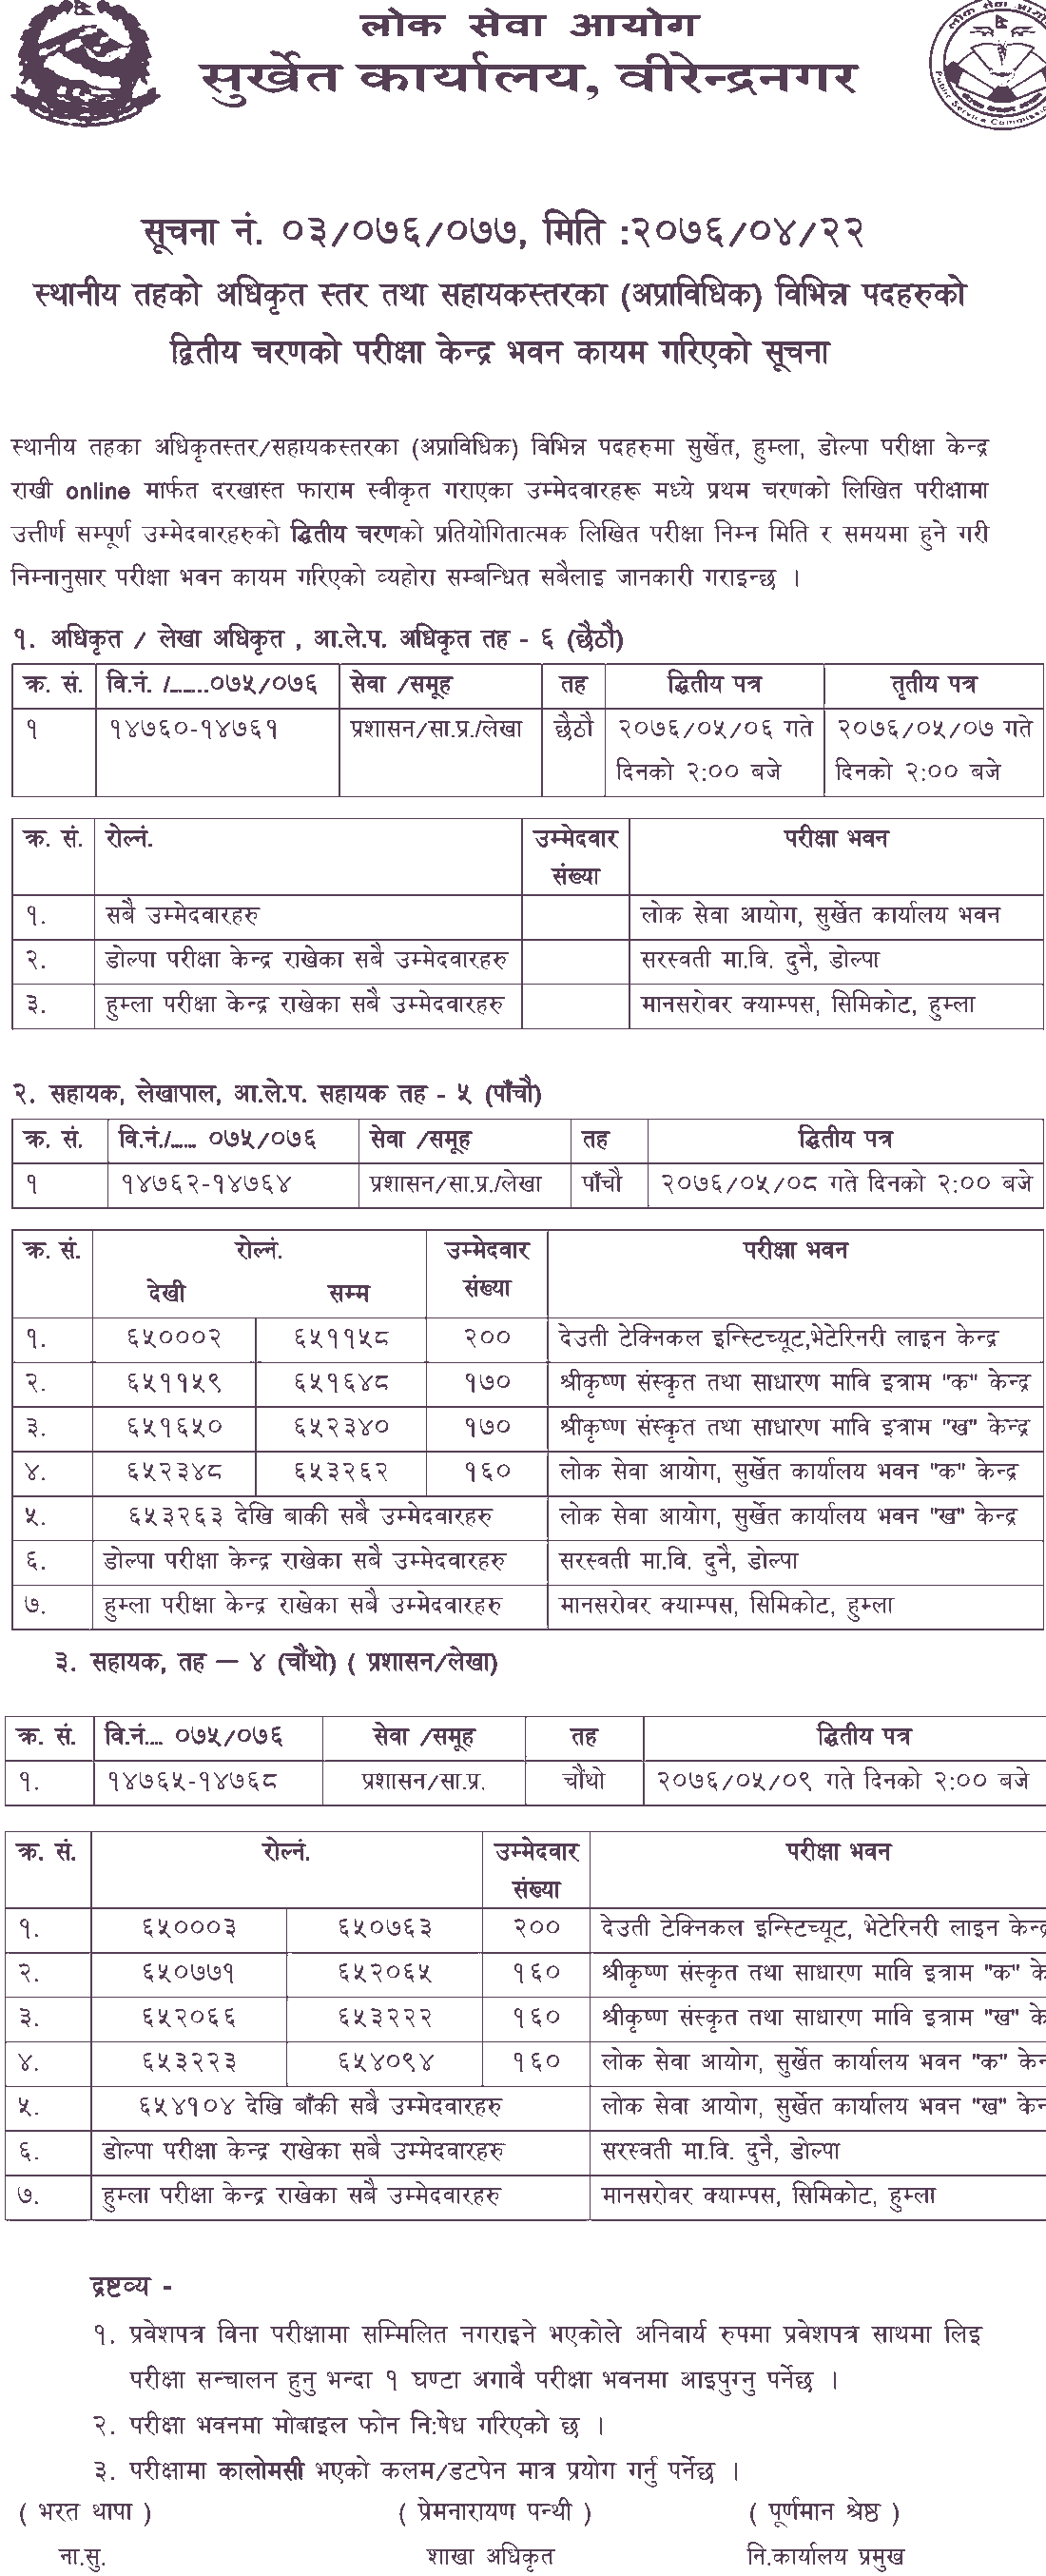 Local Level 4th, 5th and 6th Level Second Phase Exam Center - Surkeht